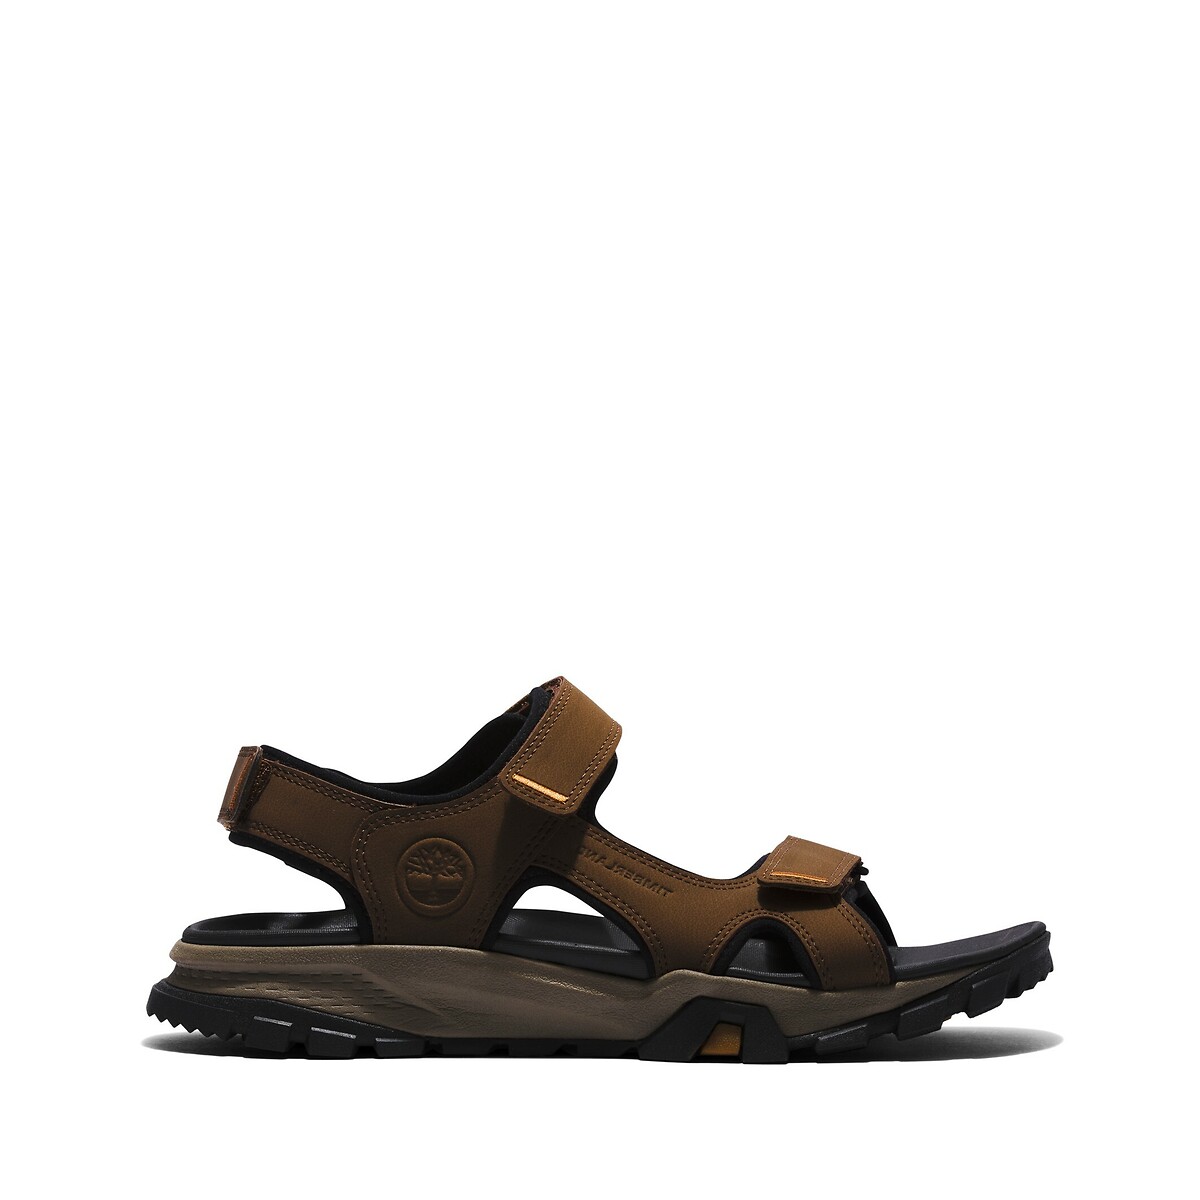 Image of Lincoln Peak Strap Sandals in Leather